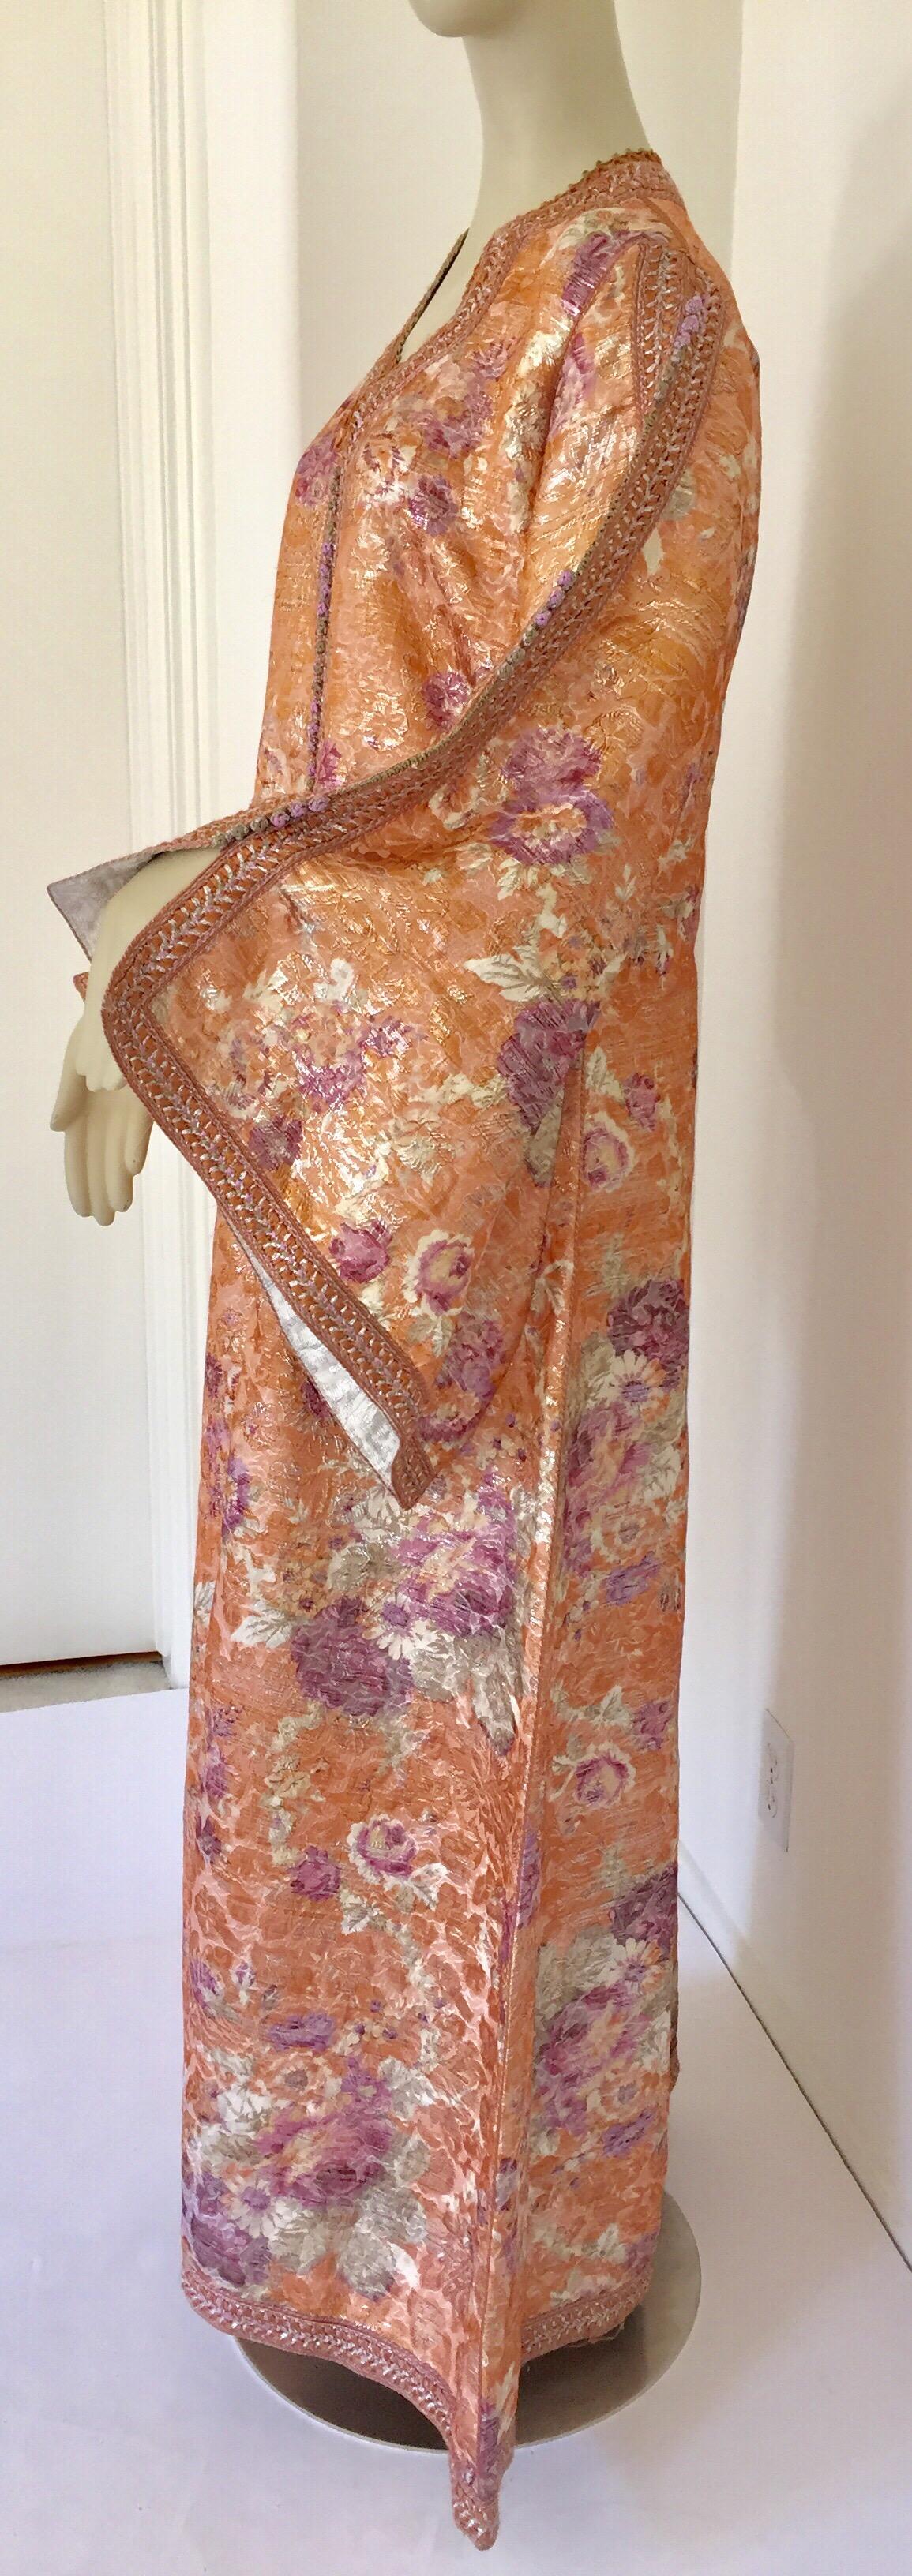 Moroccan Kaftan Orange and Purple Floral with Gold Embroidered Maxi Dress Caftan For Sale 5